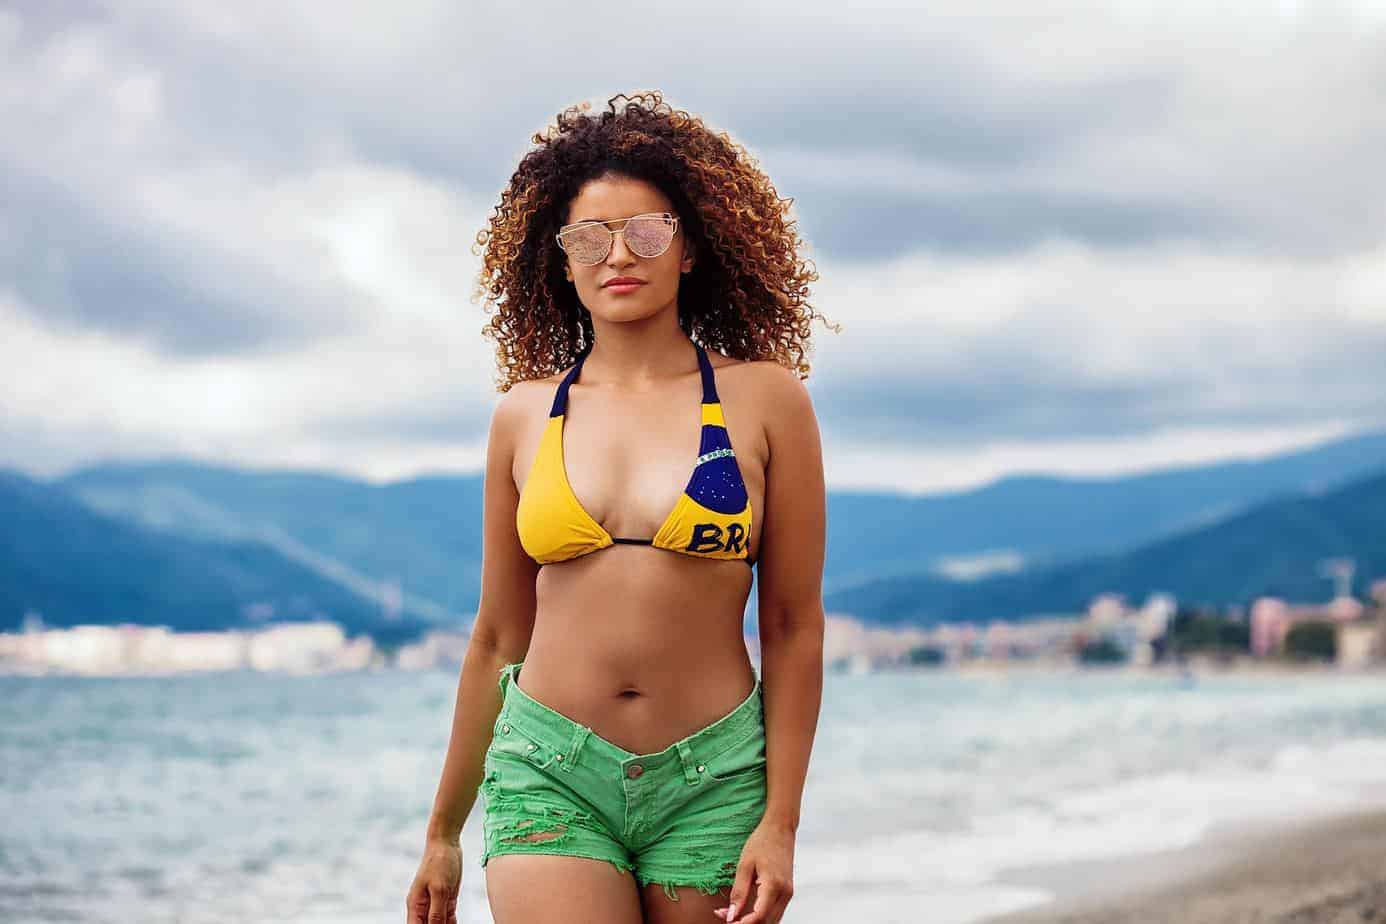 Pretty girl walking on the beach and wearing a yellow bathing suit, green jean shorts, sunglasses and ombre curly hair that's been freshly moisturized with lavender essential oil for hair growth.